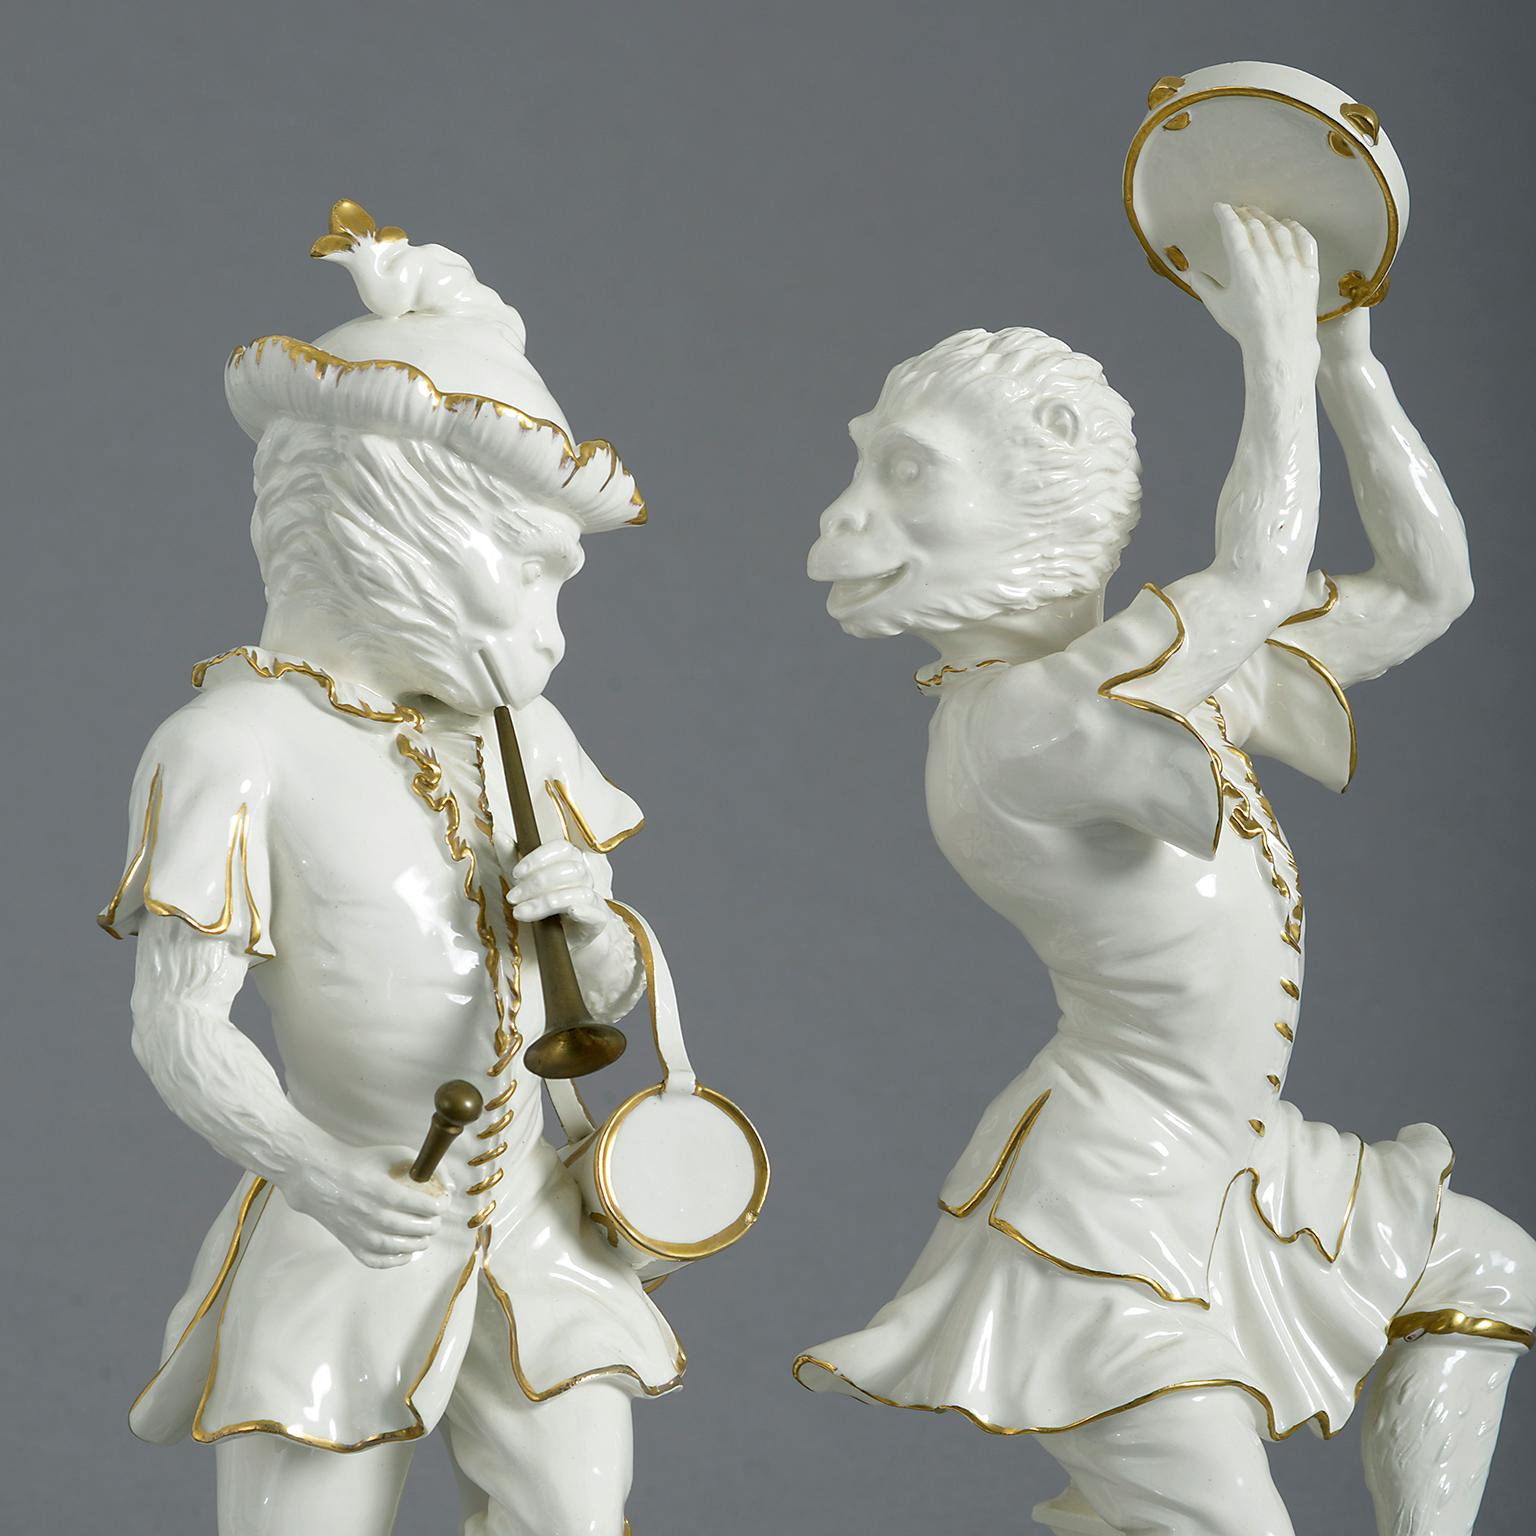 A pair of mid 20th century Italian Singerie porcelain monkey musicians one playing a tambourine, the other a drum and trumpet, shown in 18th century costume in white heightened with gilding.